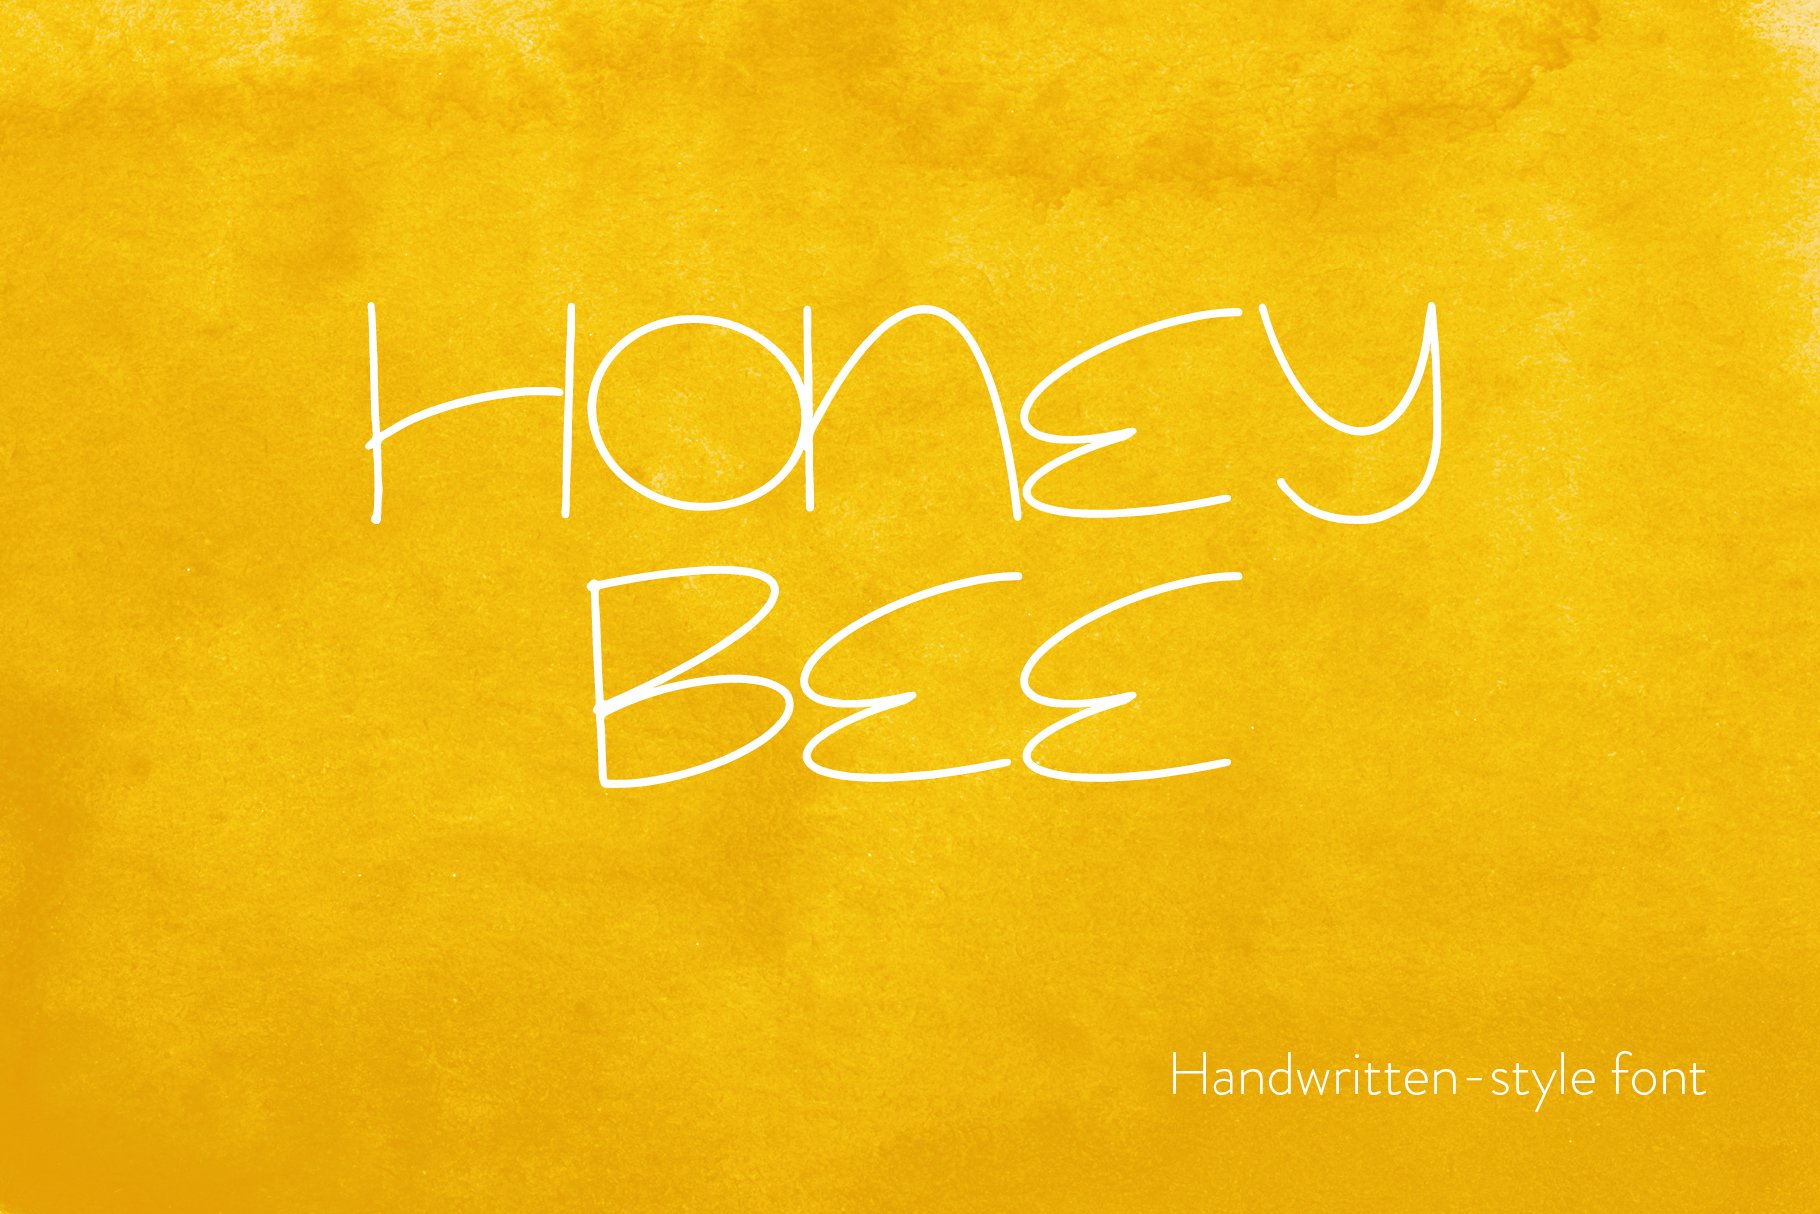 Honey Bee - Handwritten Style Font cover image.